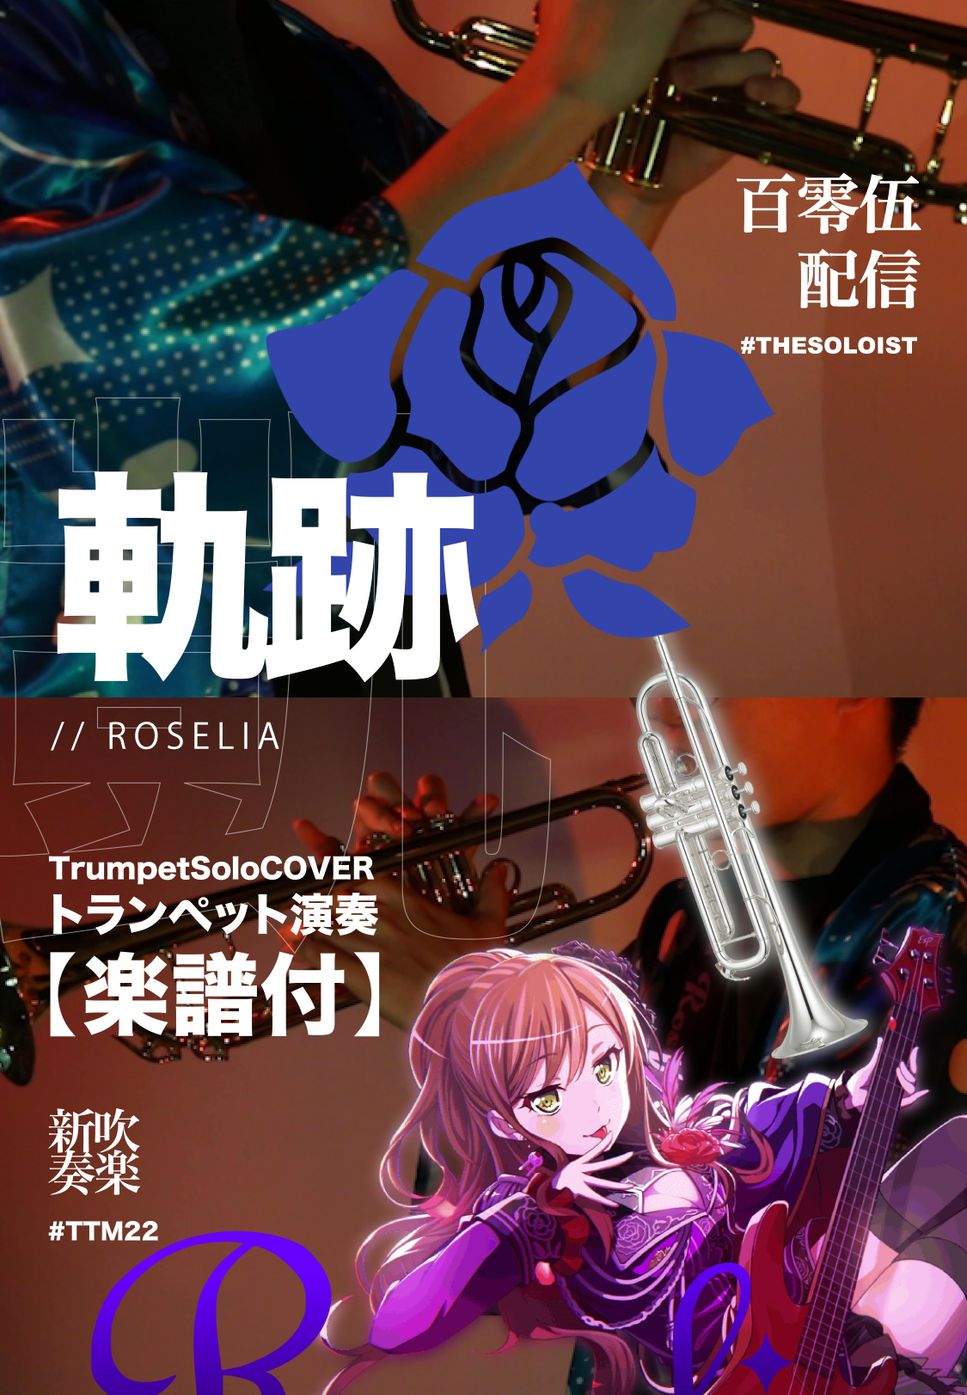 Roselia / bangdream - Oath (Trumpet solo Cover) by FungYip